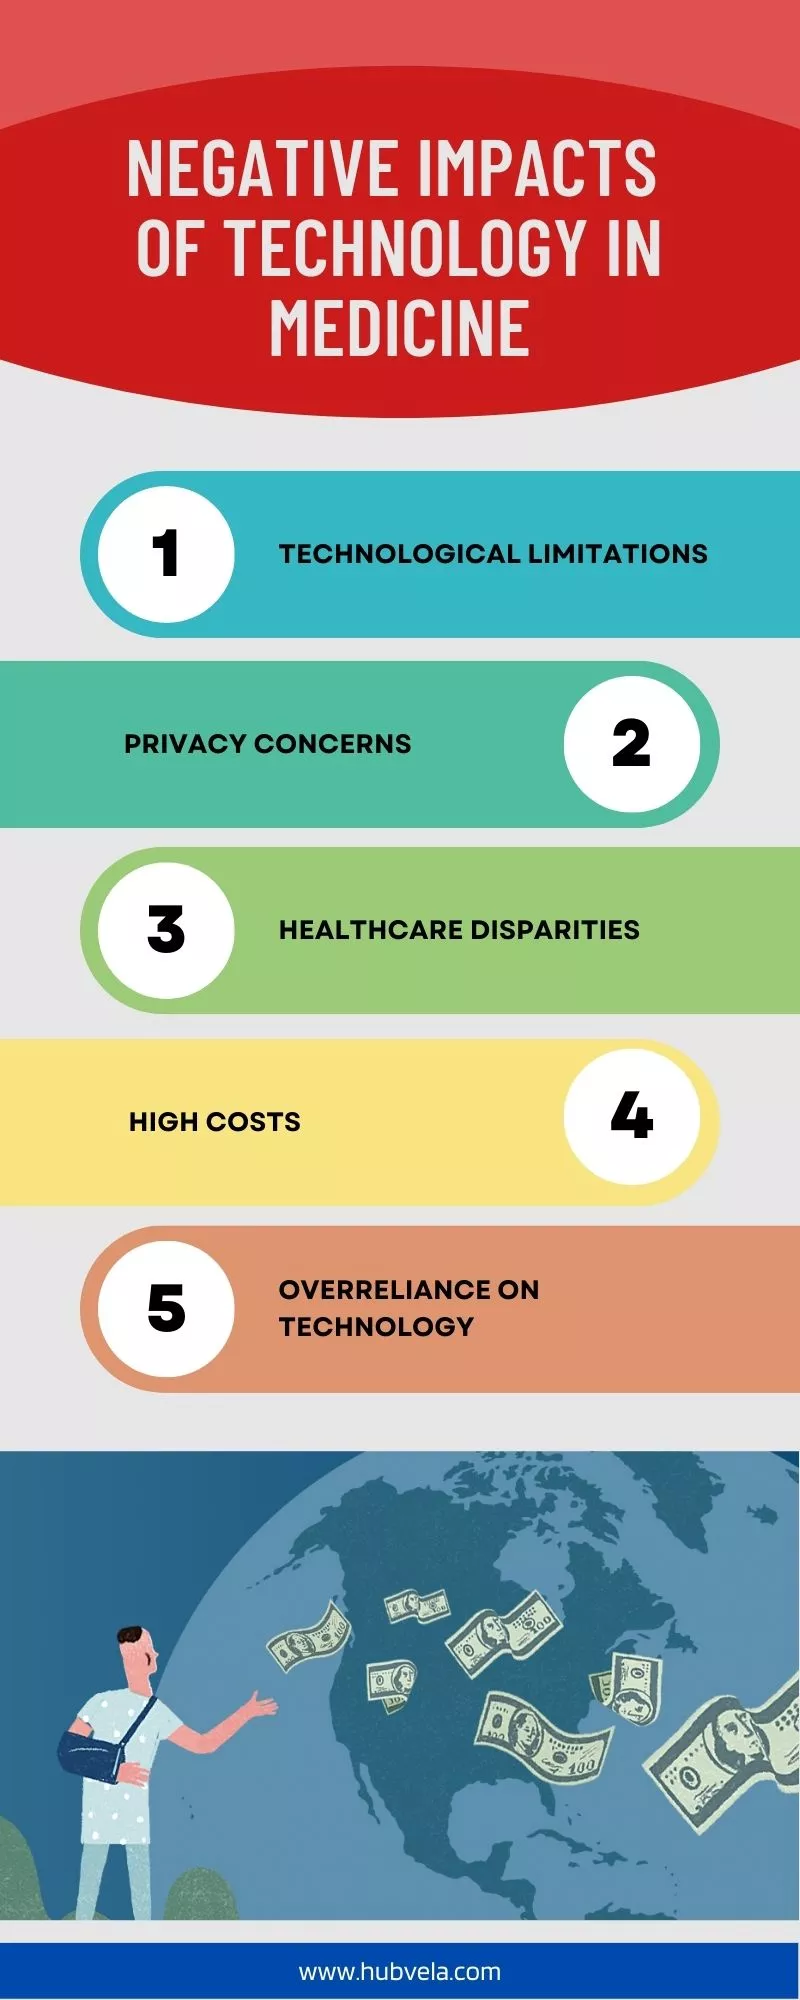 Negative Impacts of Technology on Medicine infographic